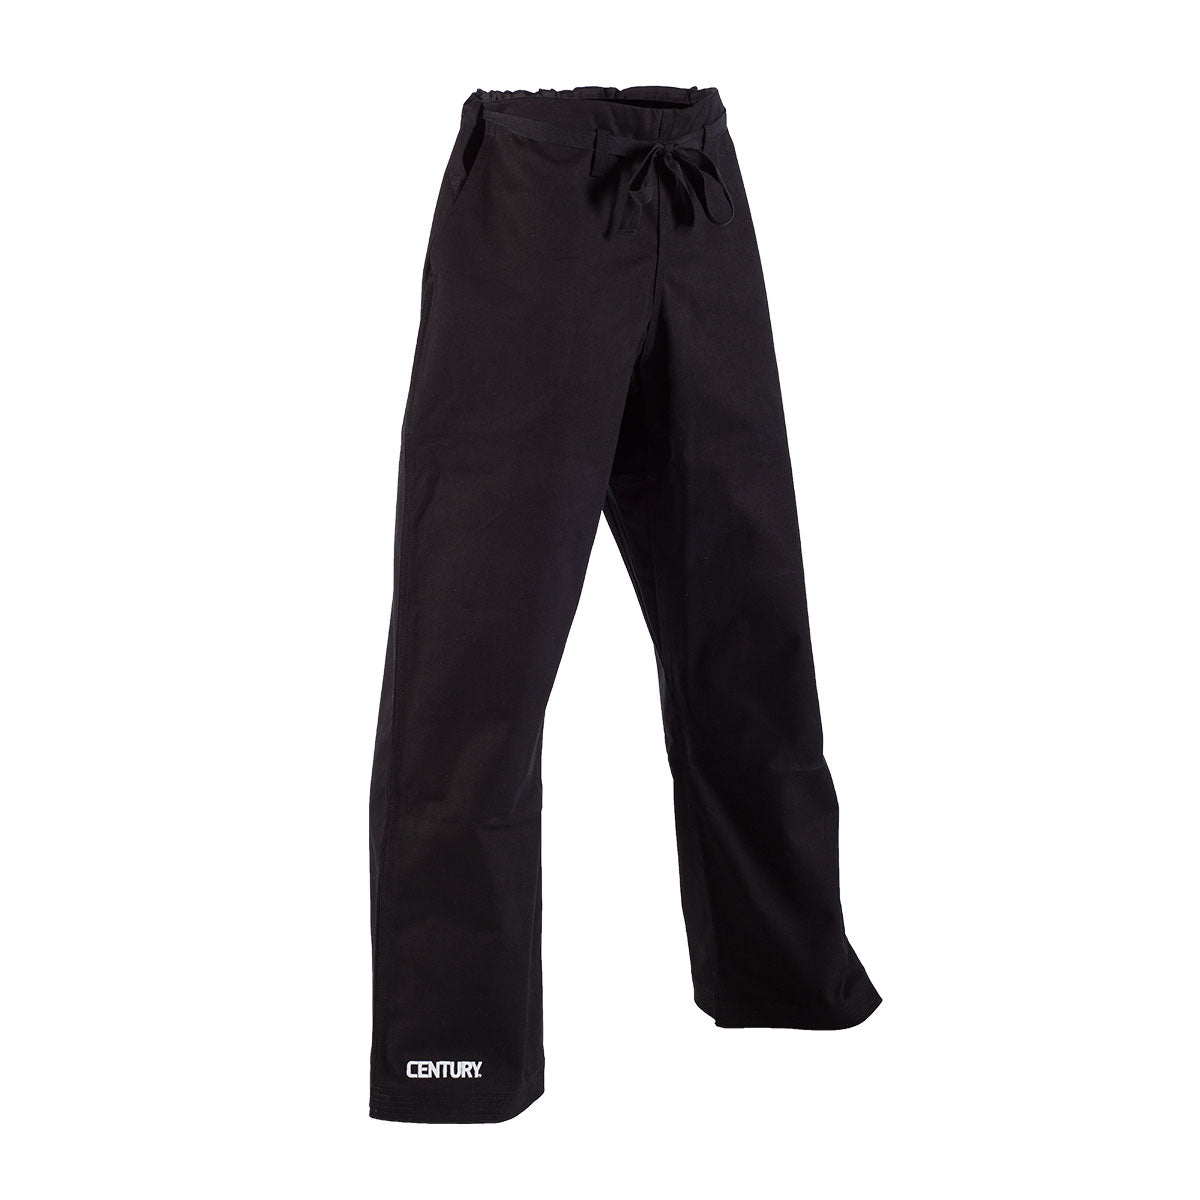 10 oz. Middleweight Brushed Cotton Traditional Waist Pants Black